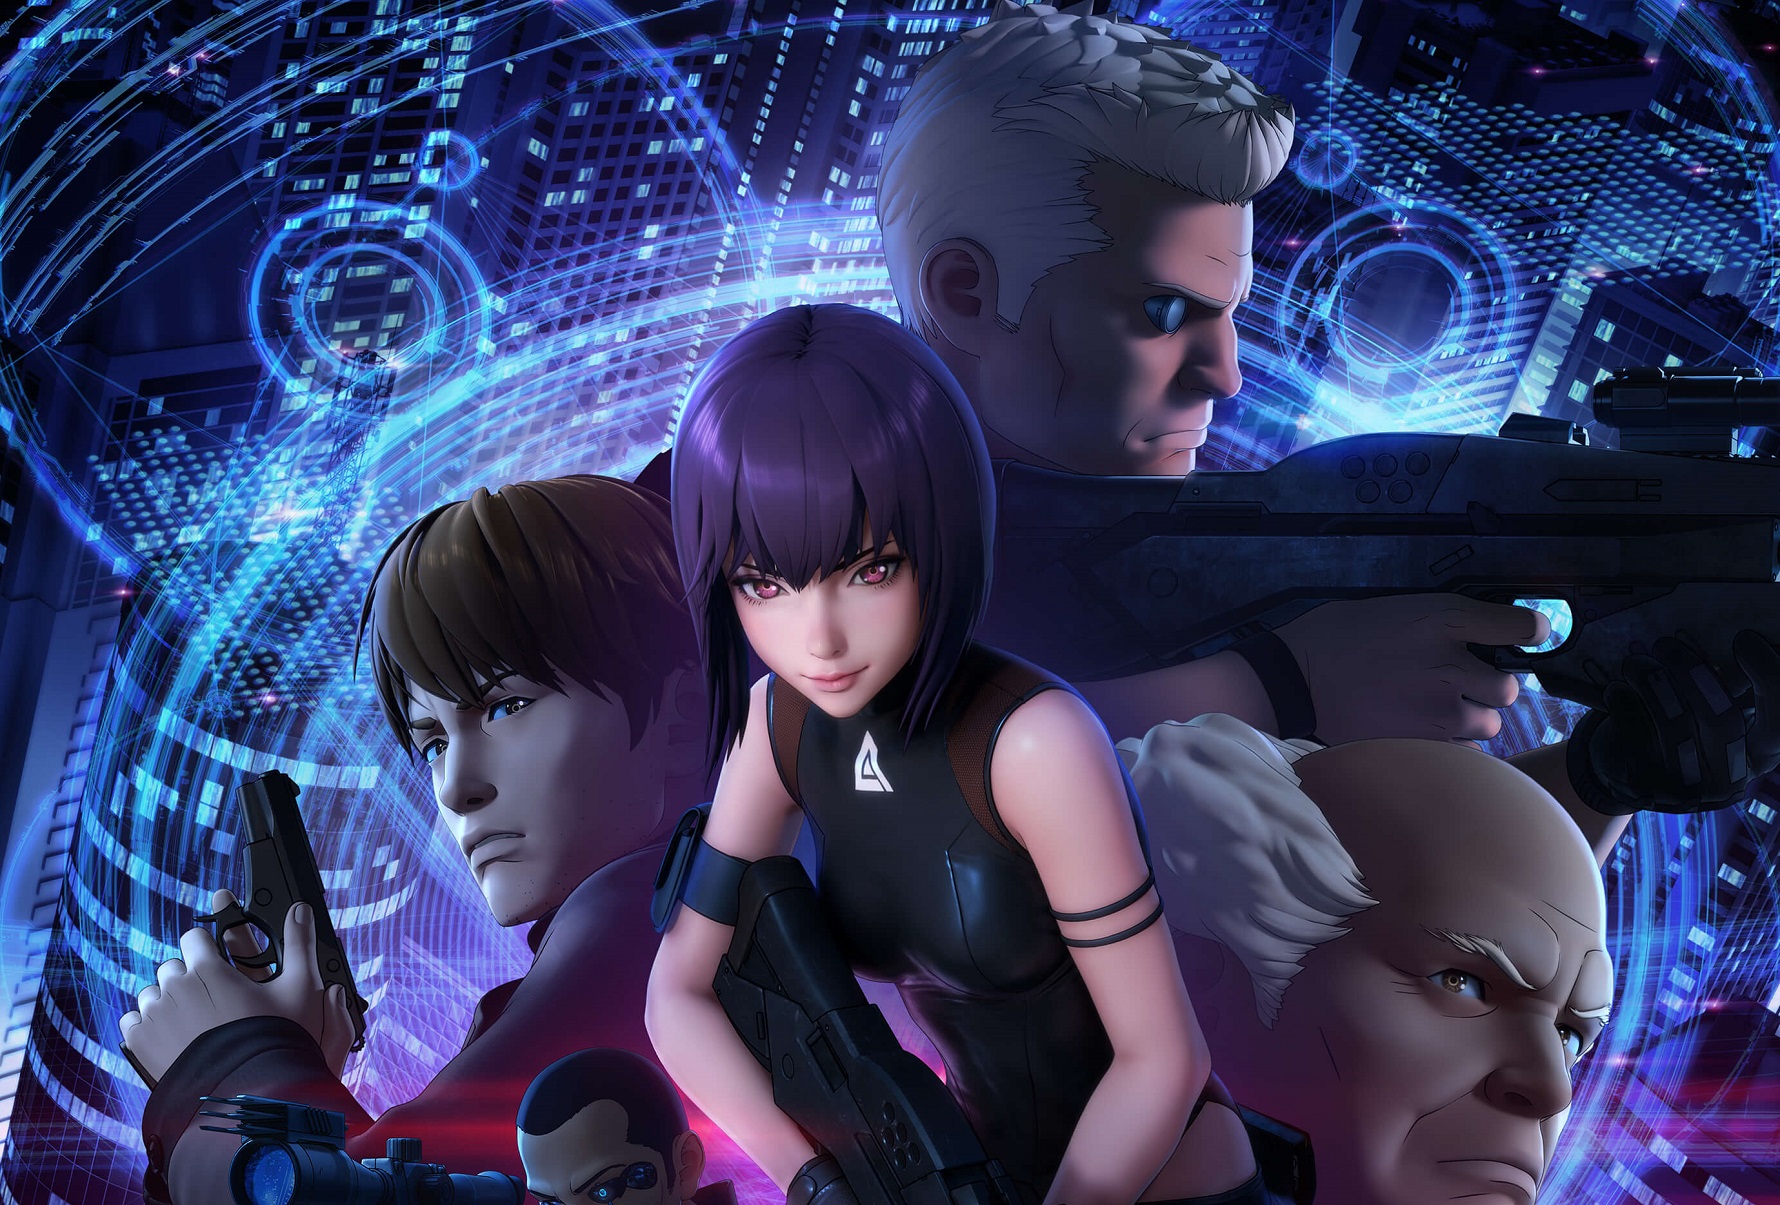 Ghost in The Shell : SAC_2045 sort aujourd'hui sur Netflix